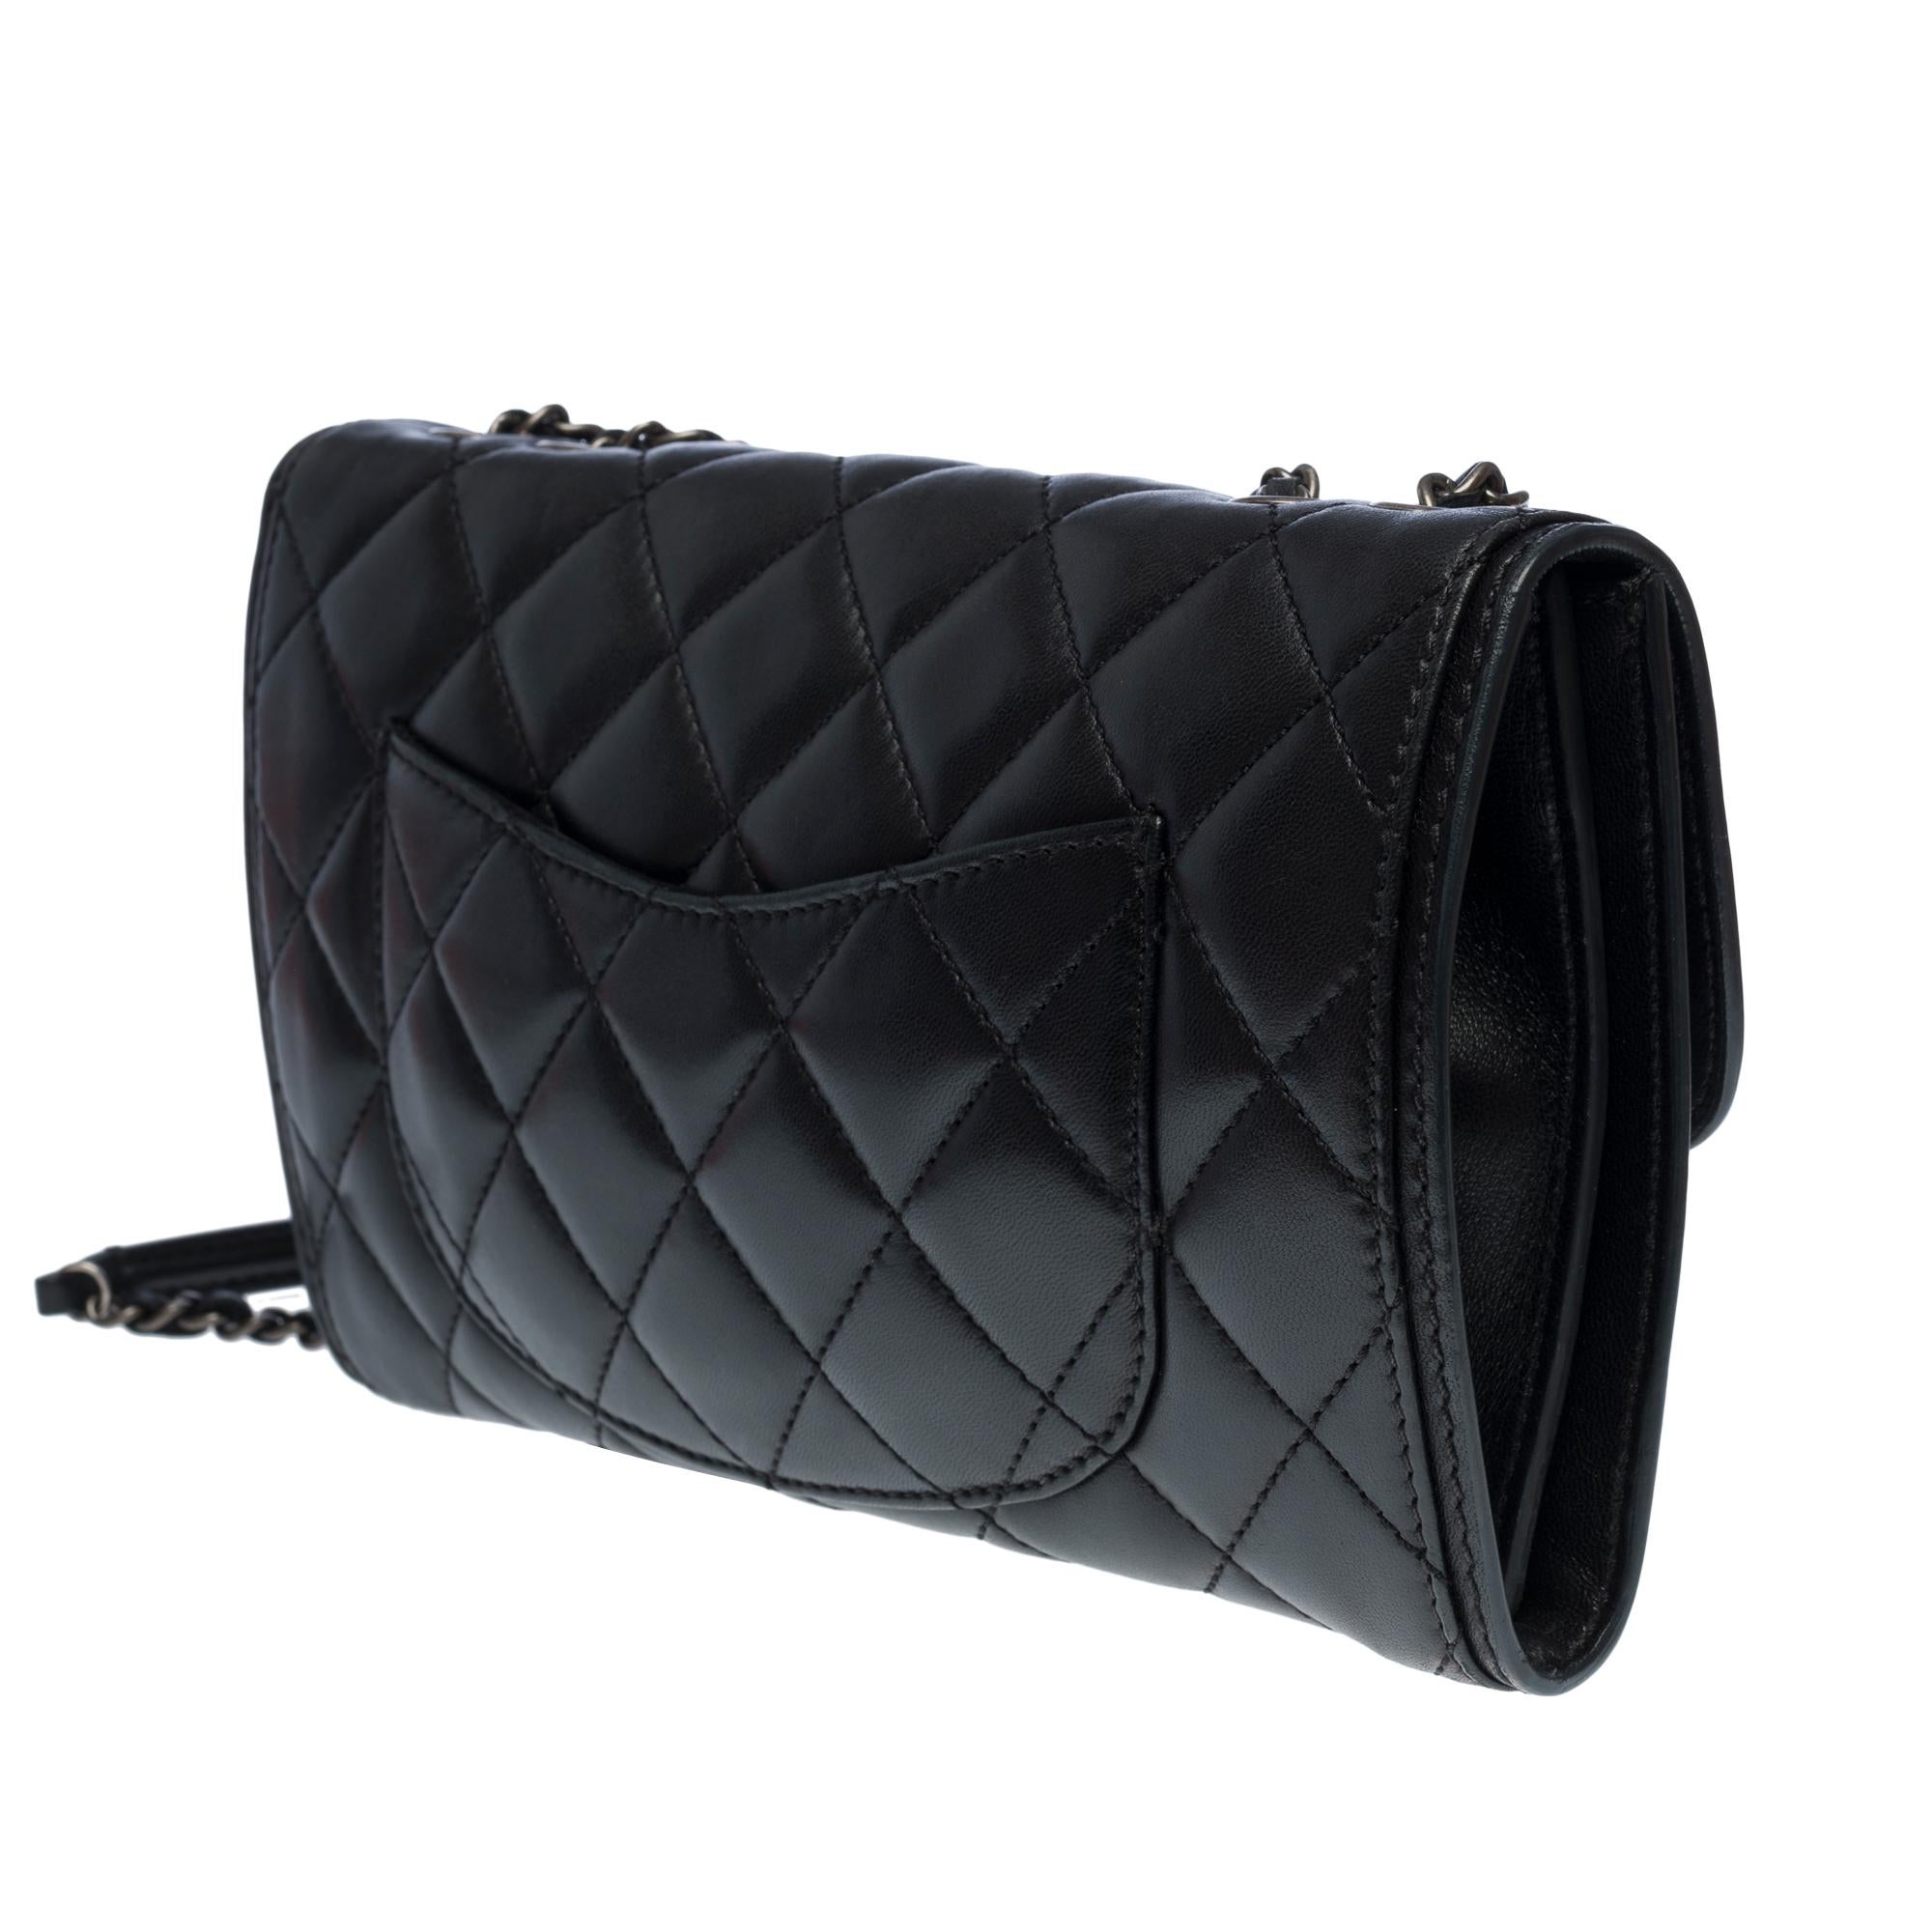 Chanel Classic shoulder flap bag in black quilted lambskin leather, RHW 1